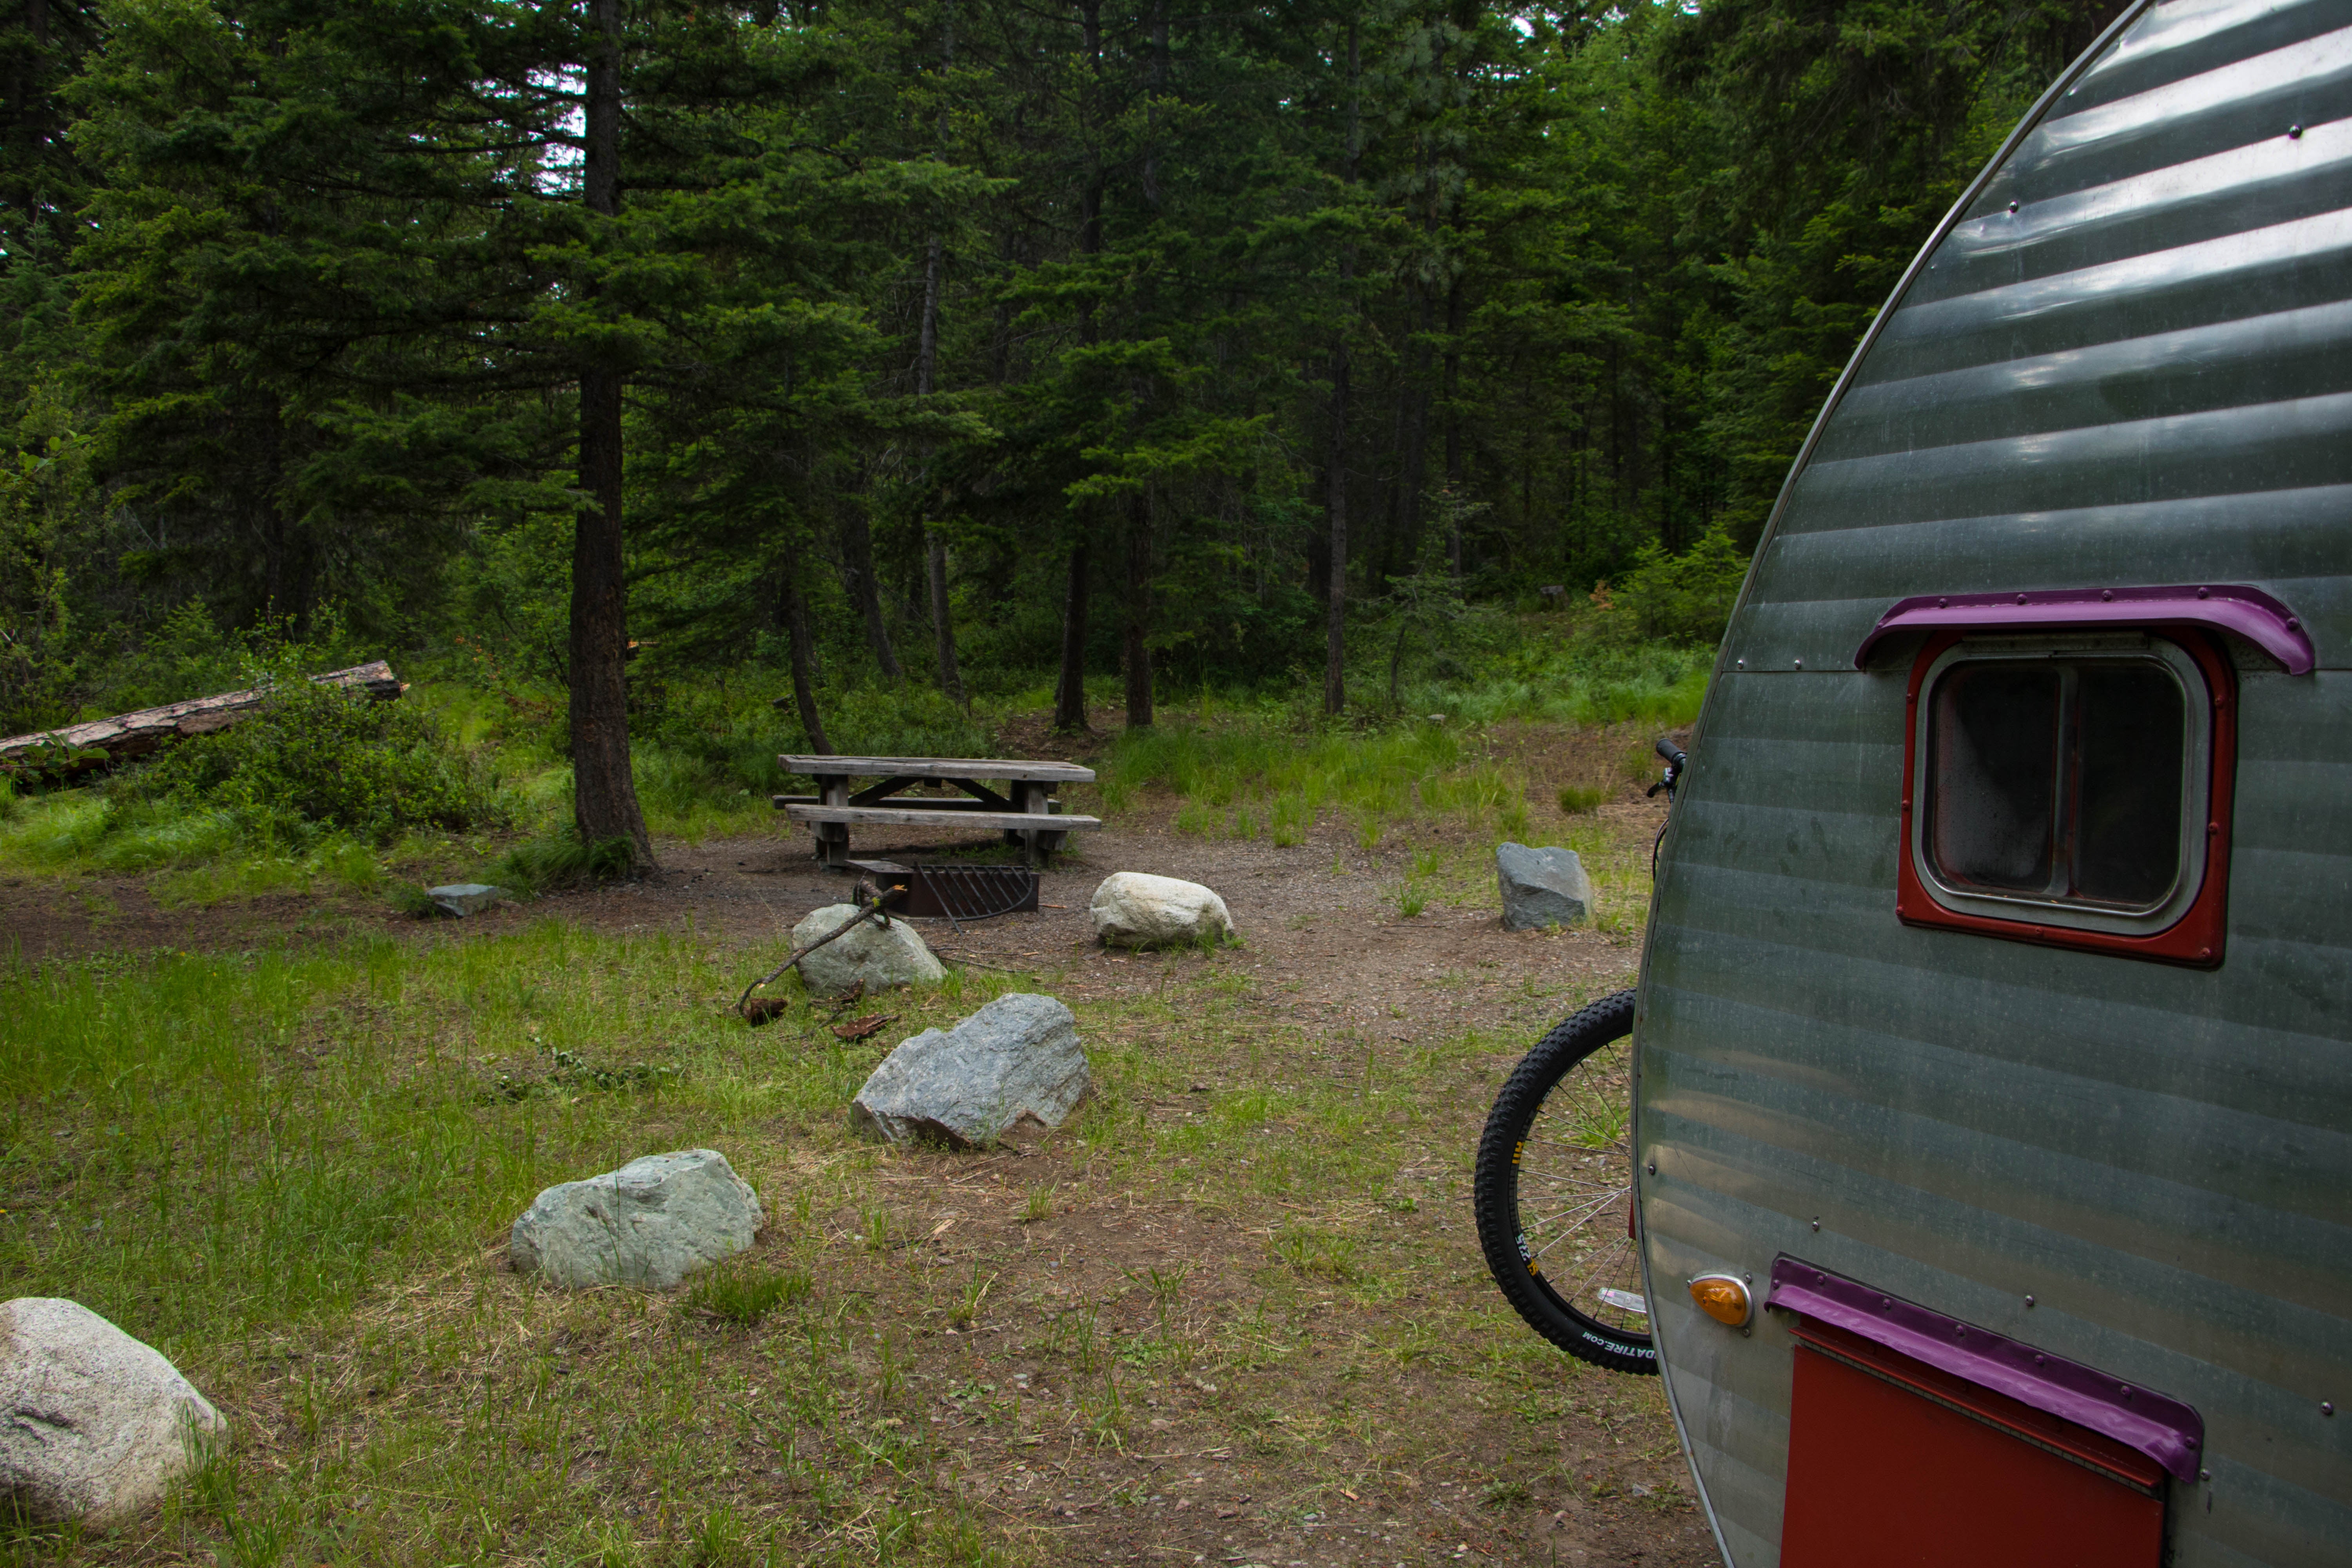 Camper submitted image from Mystery Campground - 2